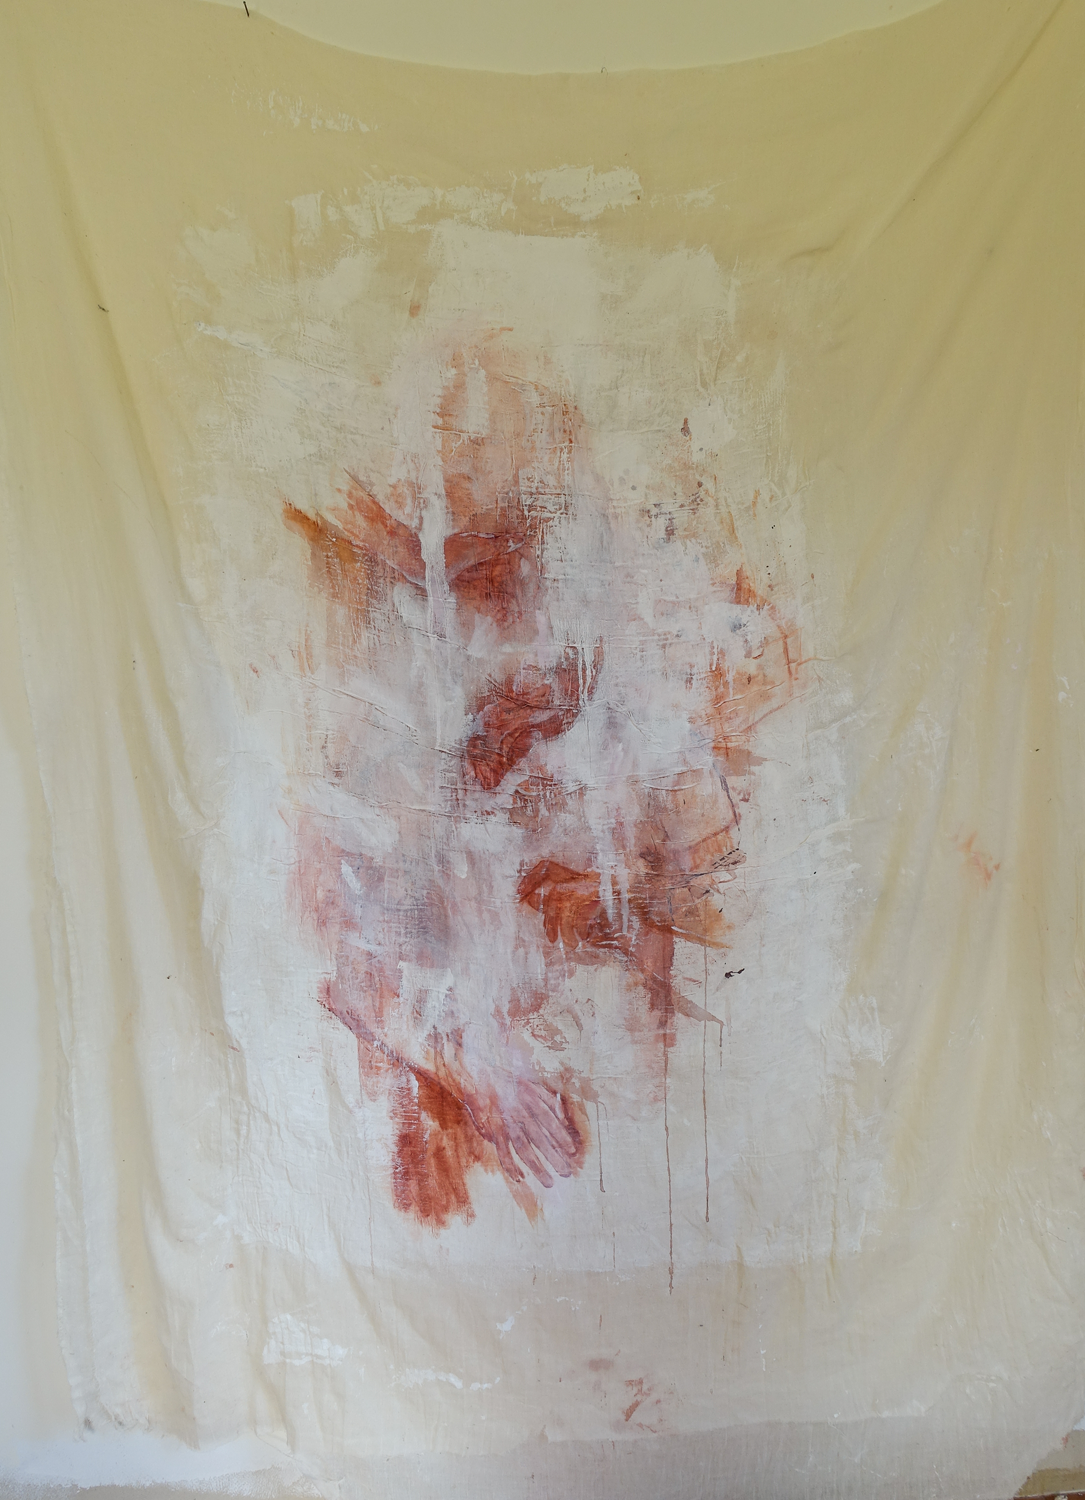 Large painting on thin cheesecloth like fabric, fragments of hands can be seen through white abstract marks, smudges and paint drips. The painting in warm toned reds and pinks